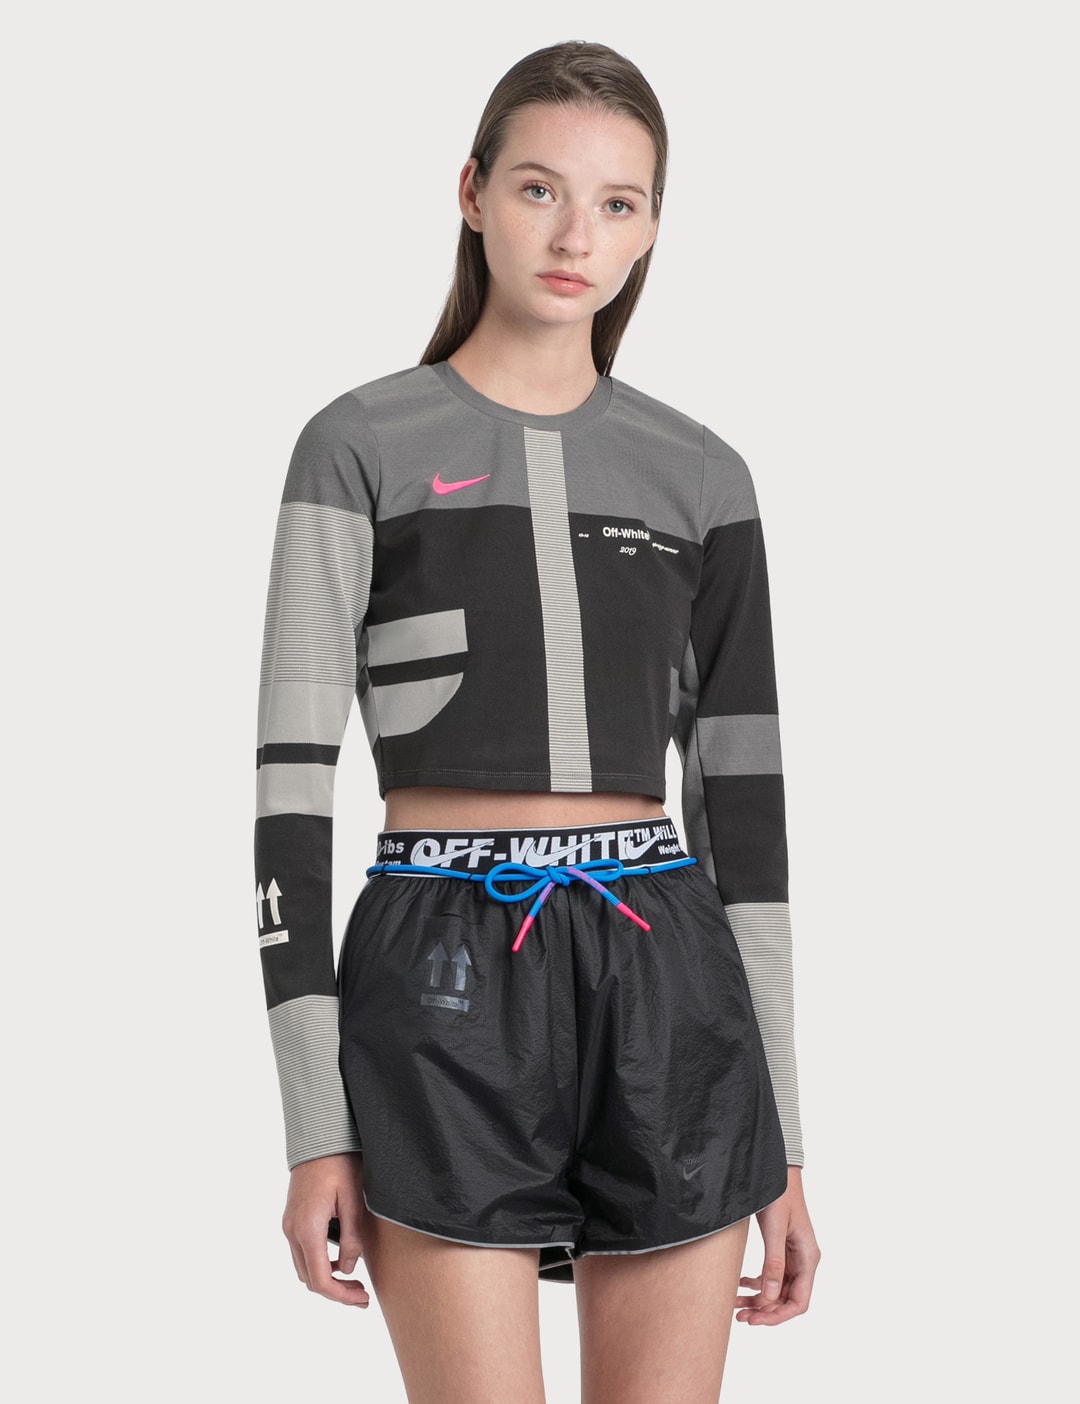 Nike - Nike x Off-White Easy Running Top | HBX - Globally Curated ...